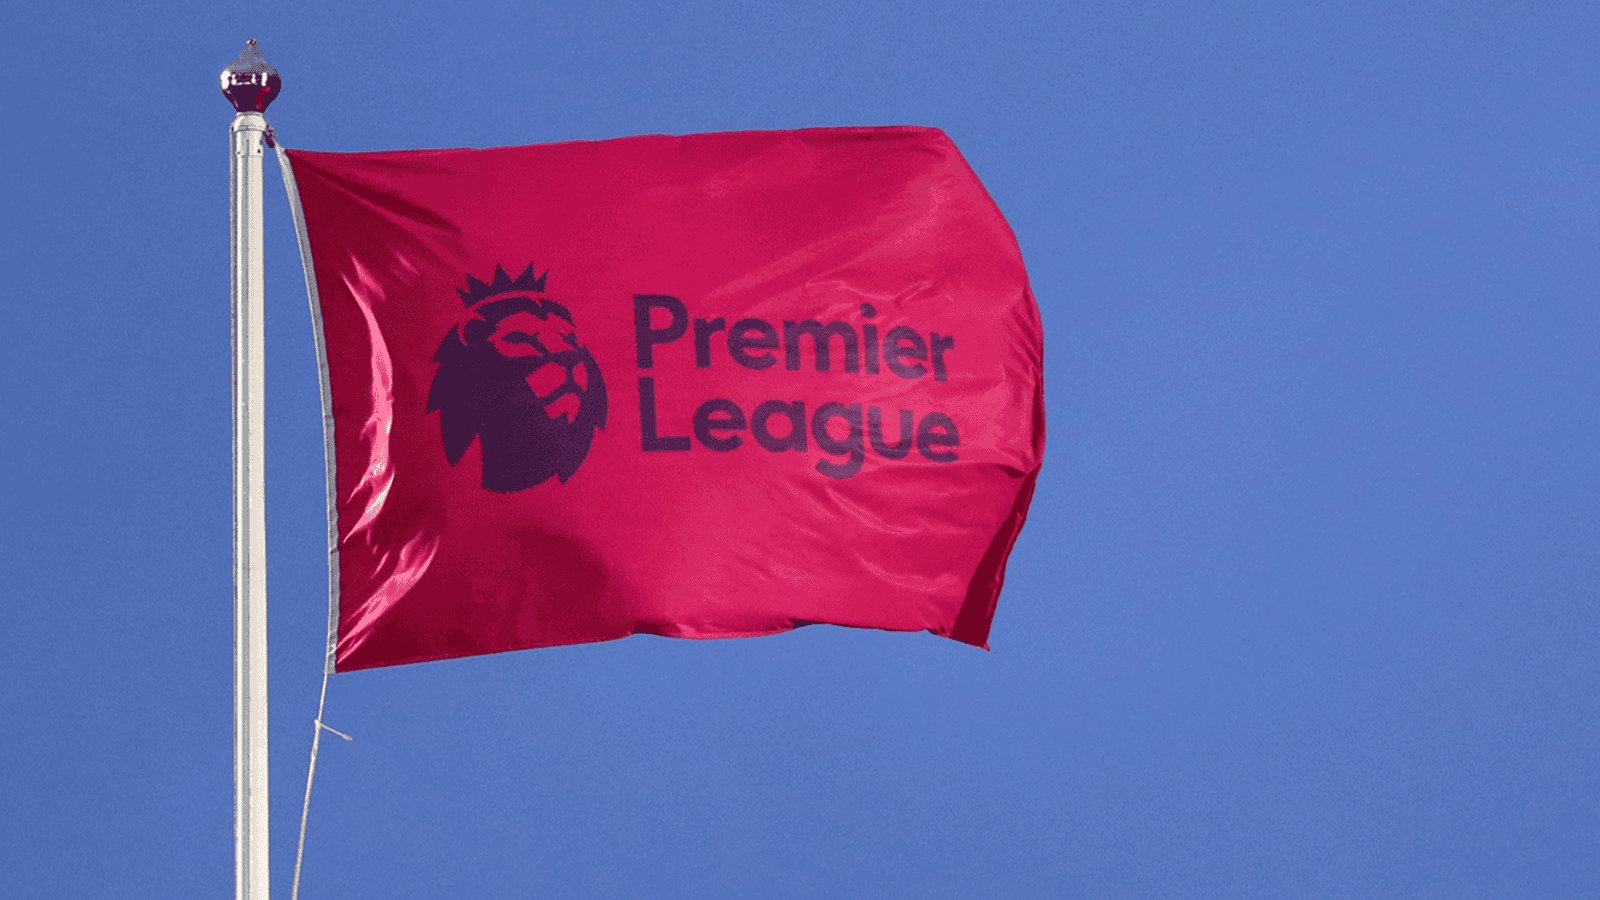 What's new in the Premier League this season